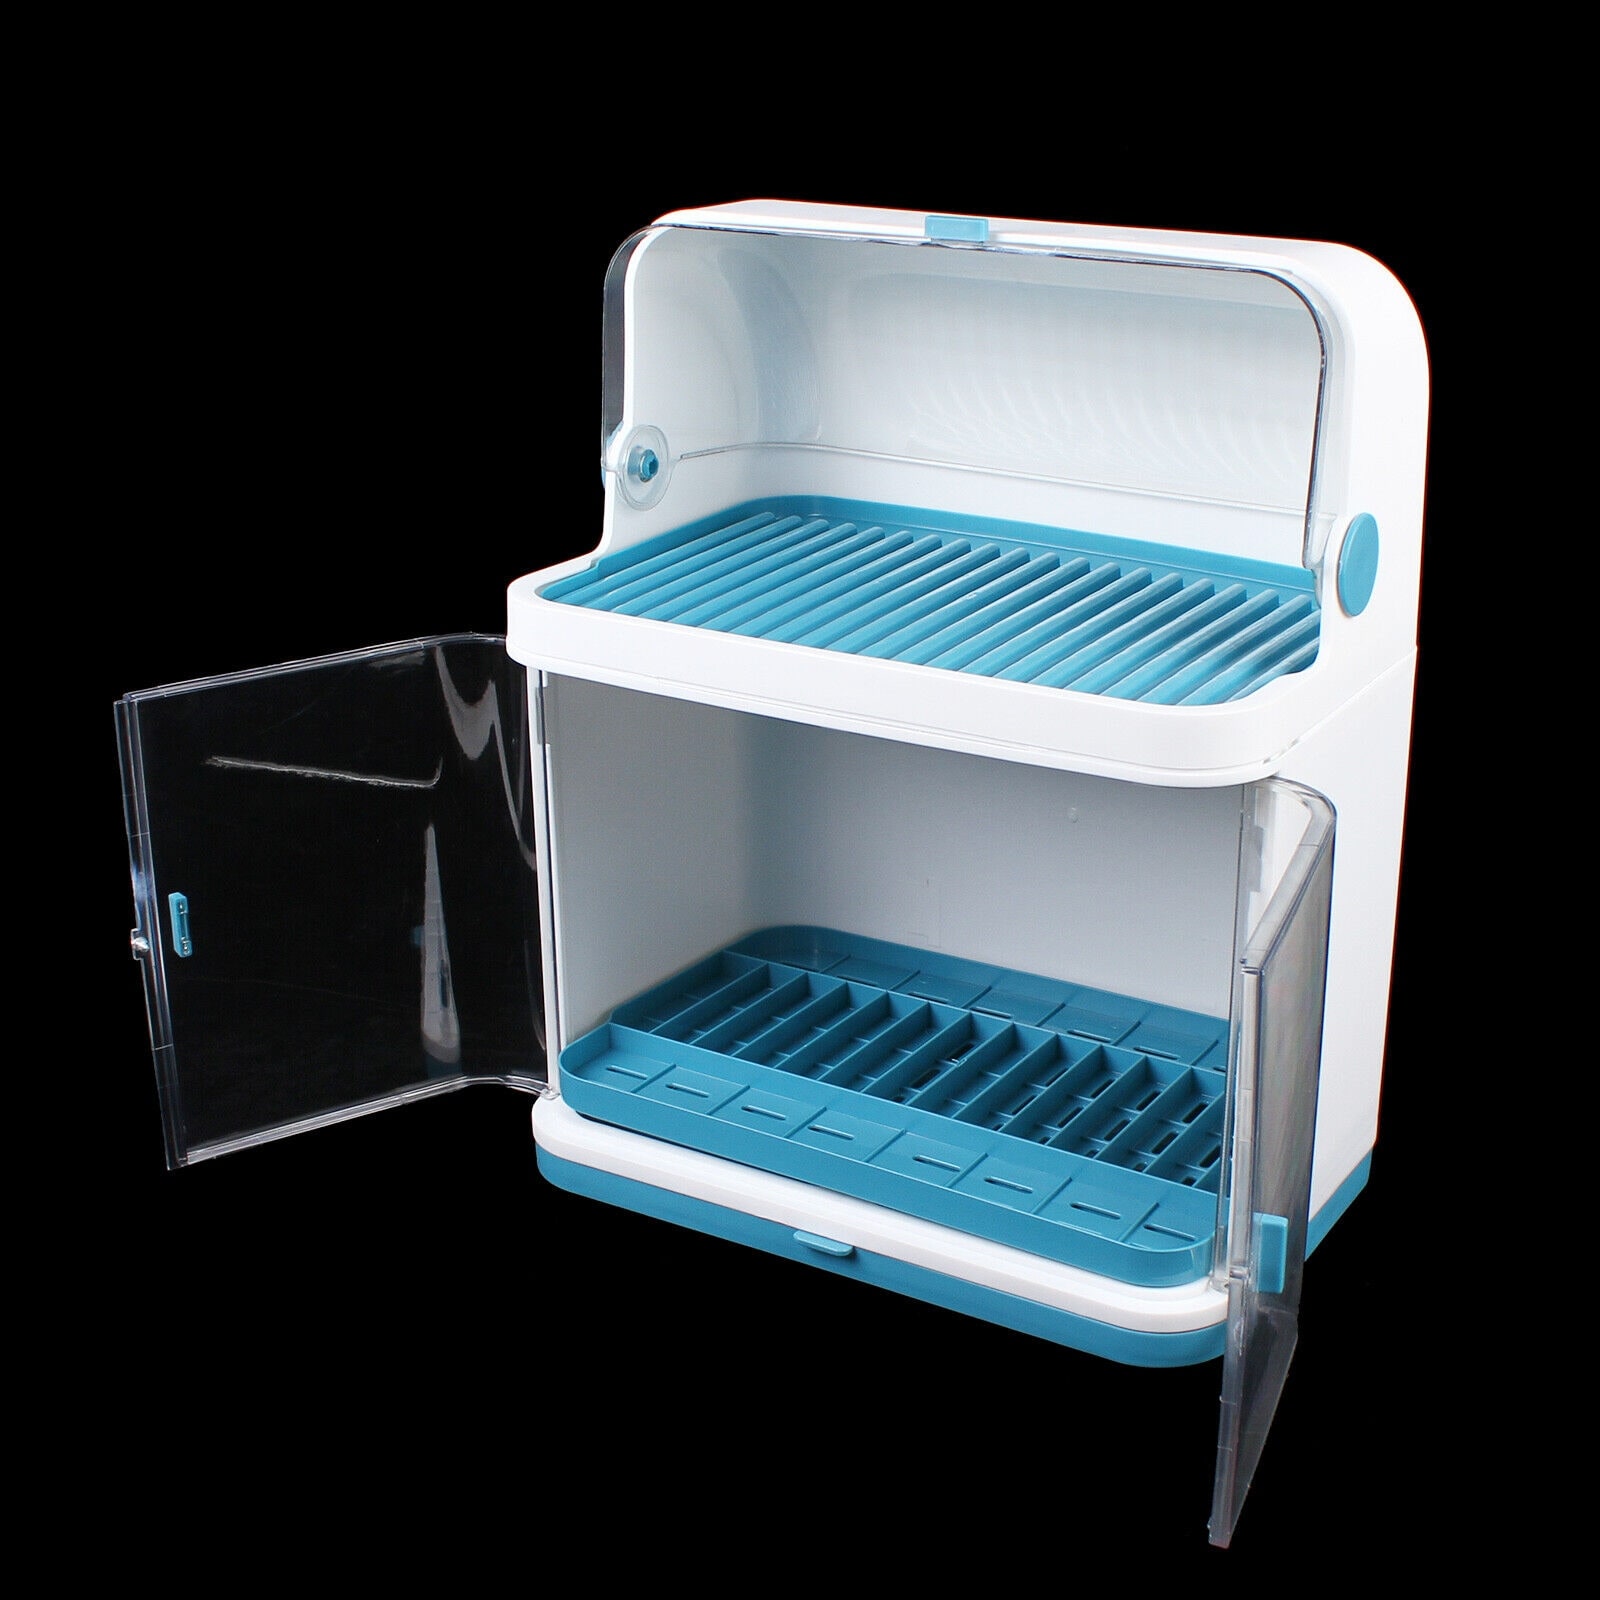 https://ak1.ostkcdn.com/images/products/is/images/direct/8a2ea3566922cb2c8a61512037d646de5fb56d68/2-Tier-Plastic-Kitchen-Dish-Drying-Rack-with-Lid-Cover.jpg